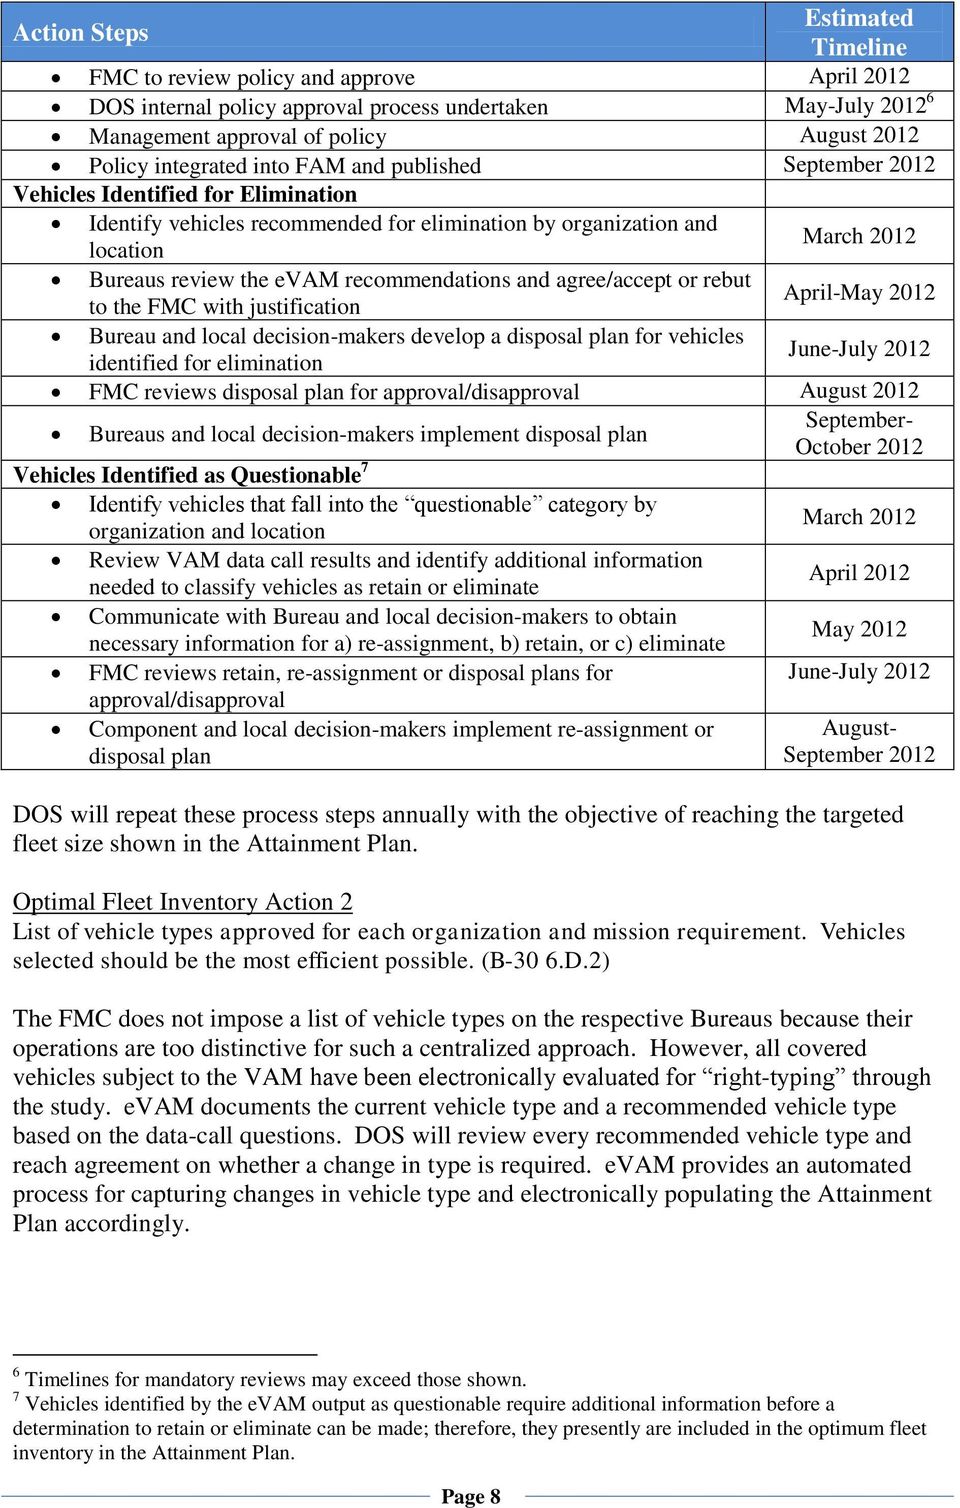 and agree/accept or rebut to the FMC with justification April-May 2012 Bureau and local decision-makers develop a disposal plan for vehicles identified for elimination June-July 2012 FMC reviews